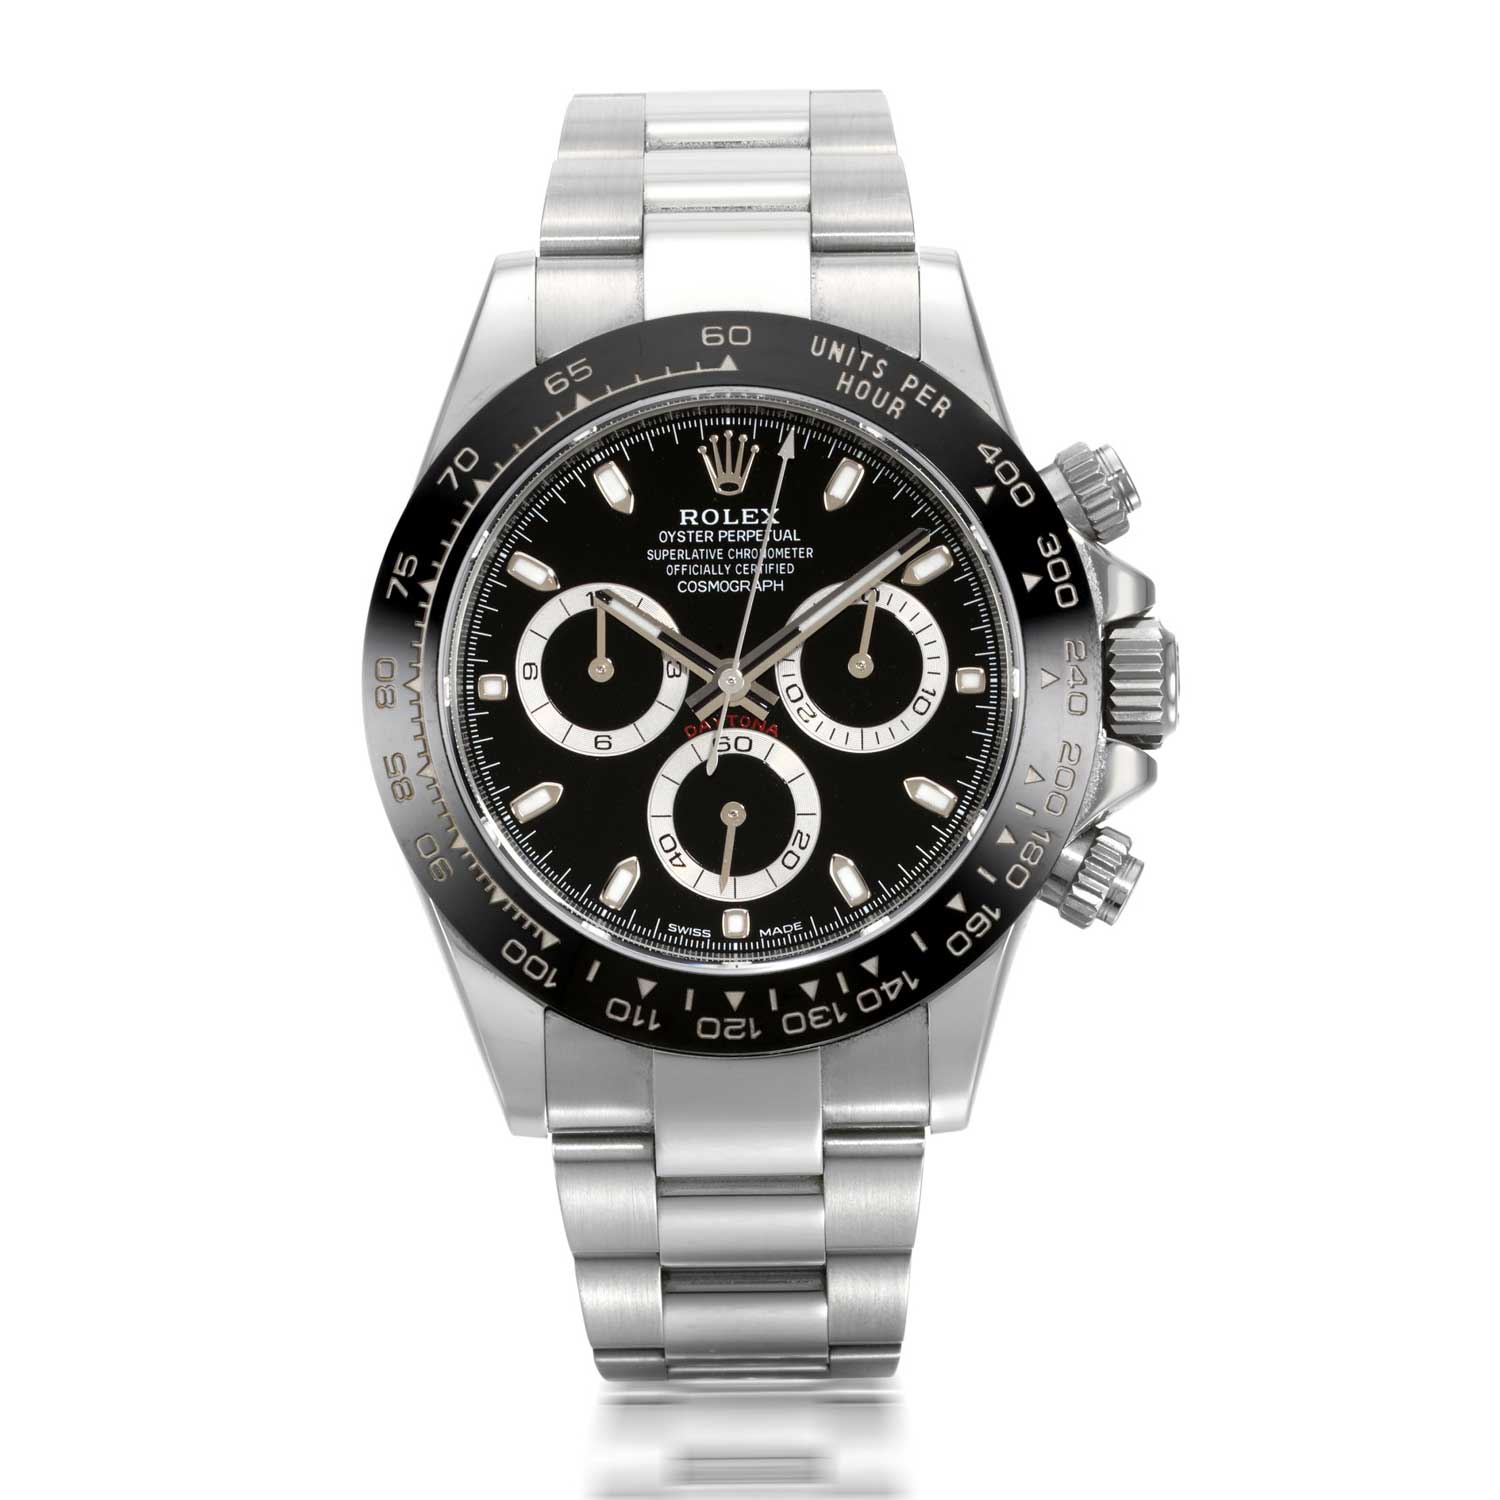 In 2016, the standard stainless steel Daytona was now given the reference 116500LN. It now had the Cerachrom bezel first seen five years ago on the 116515LN. Cue the wait lists… (Image: Sotheby’s)